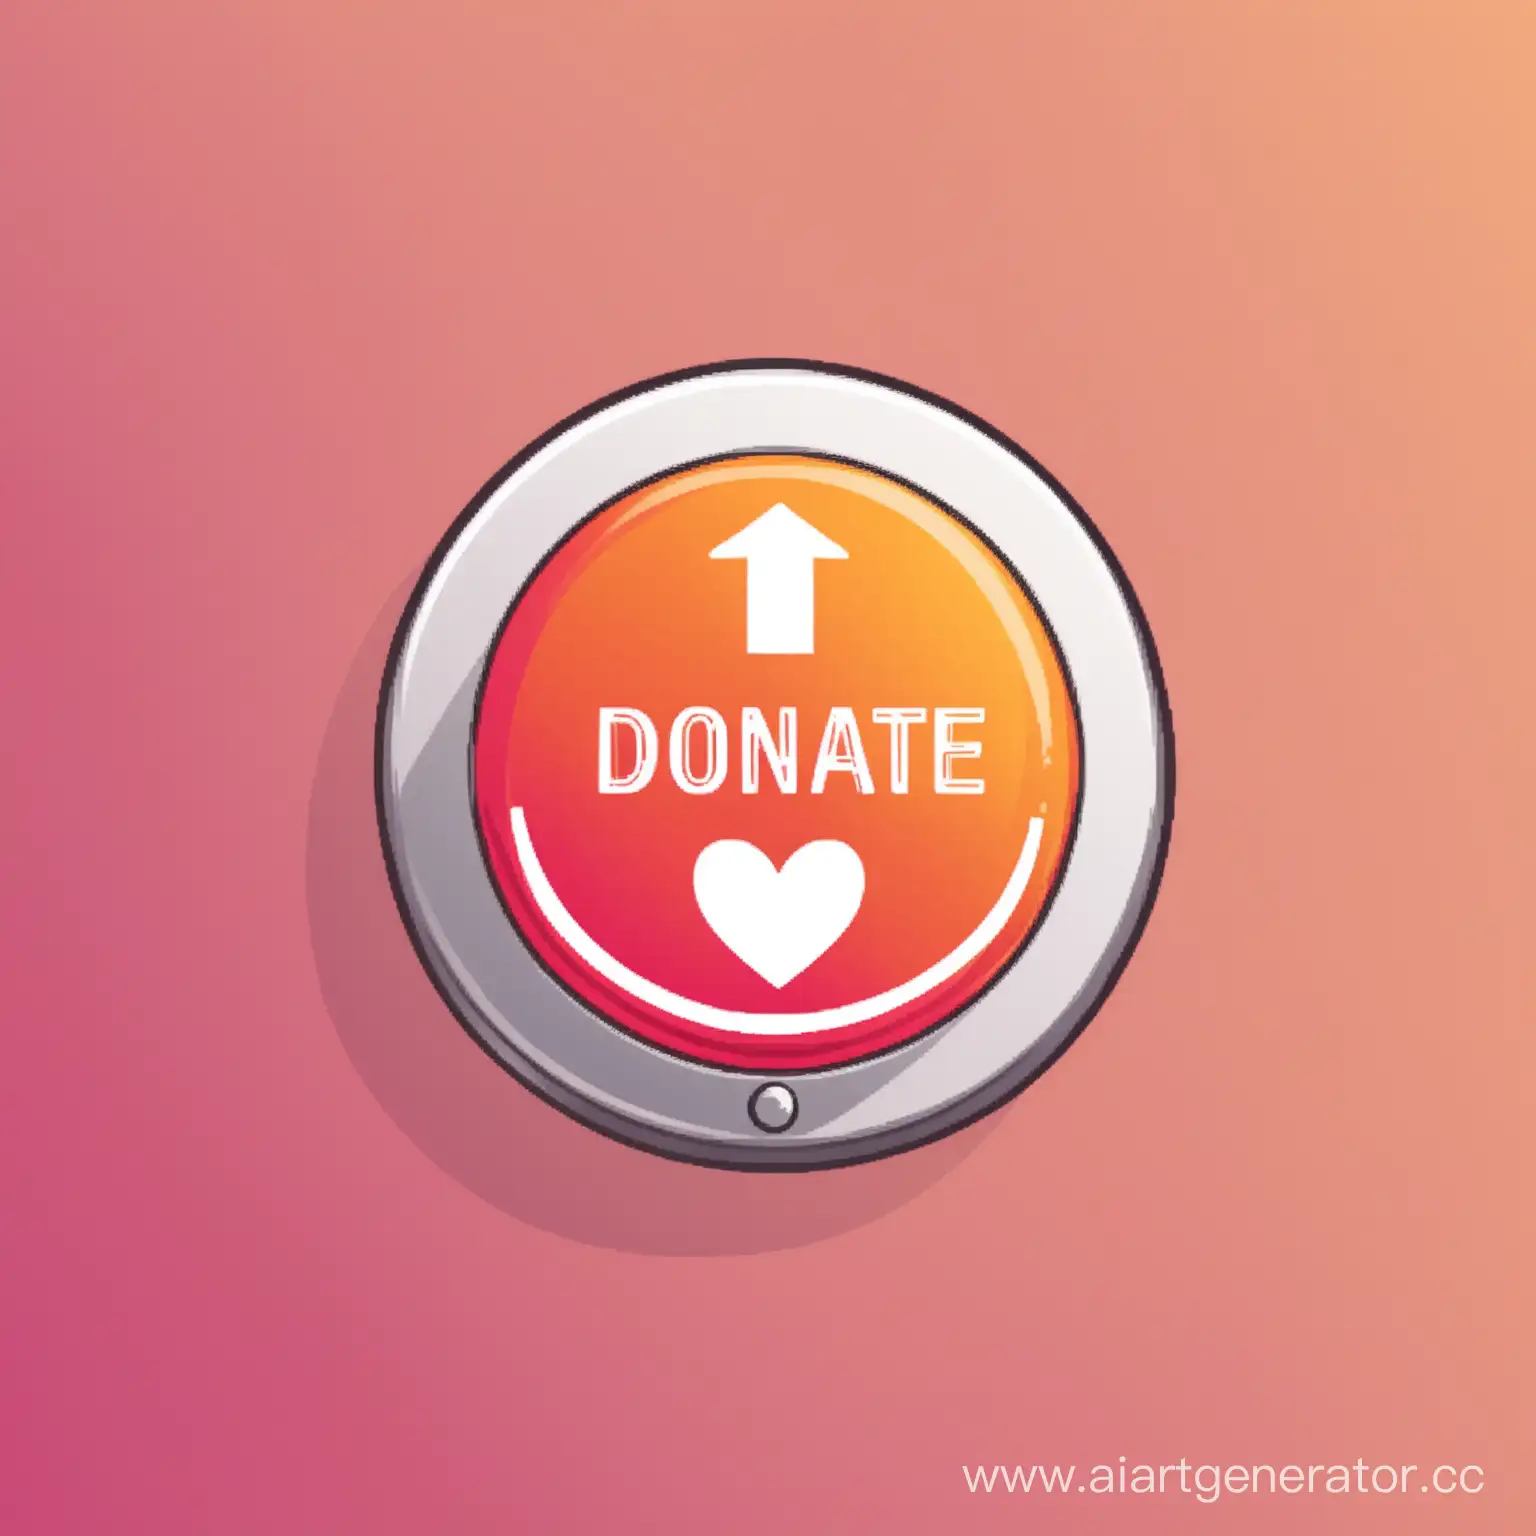 Colorful-Donation-Button-with-Hands-Reaching-Out